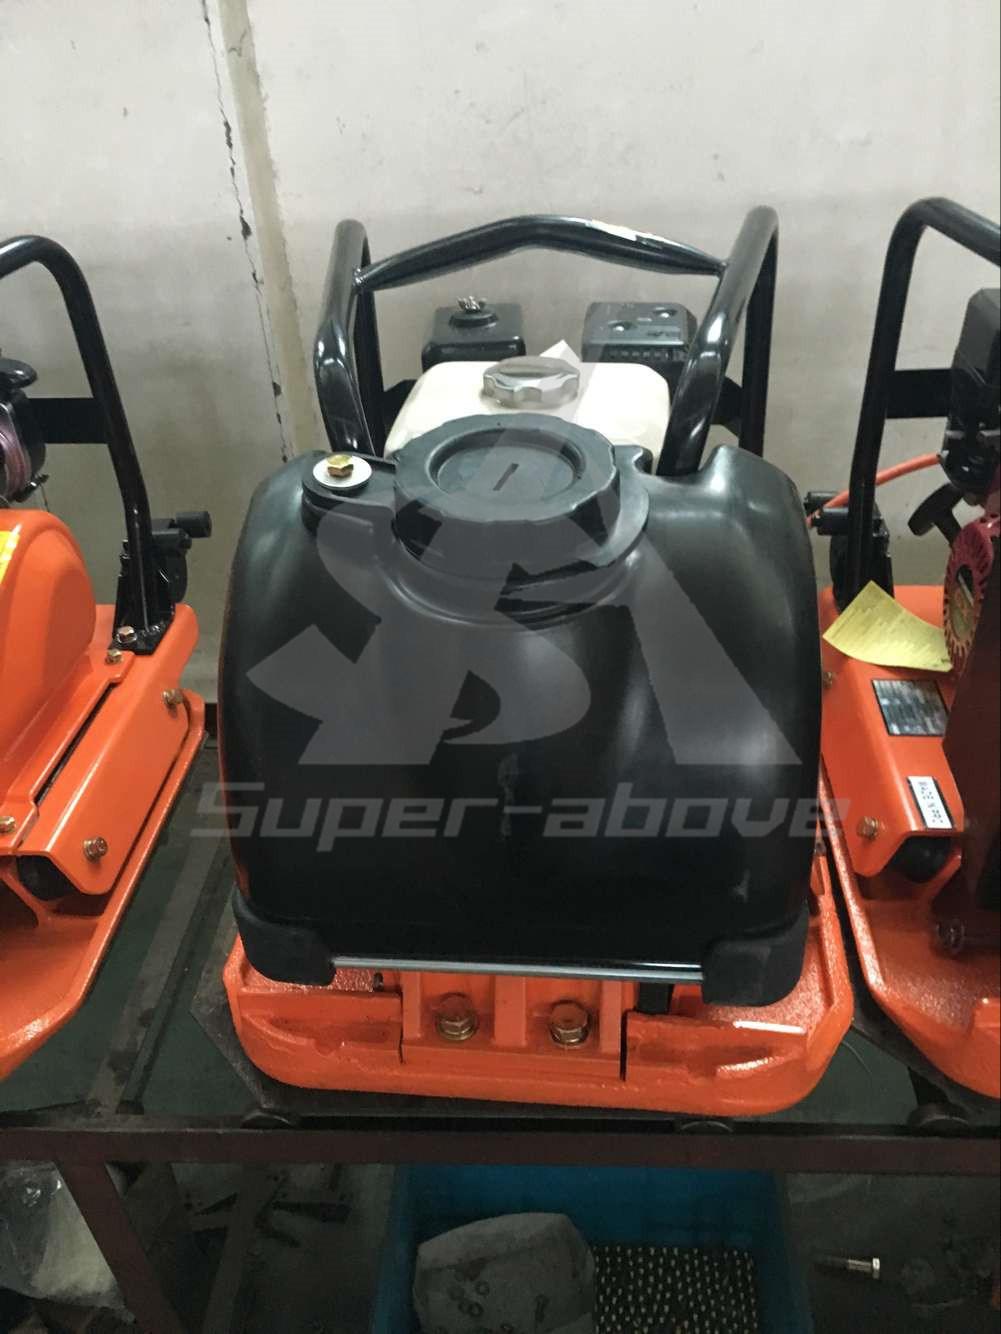 Professional Supplier of Vibrating Plate Compactor / Concrete Vibrator Plate Compactor / Vibrating Plate Compactor Parts